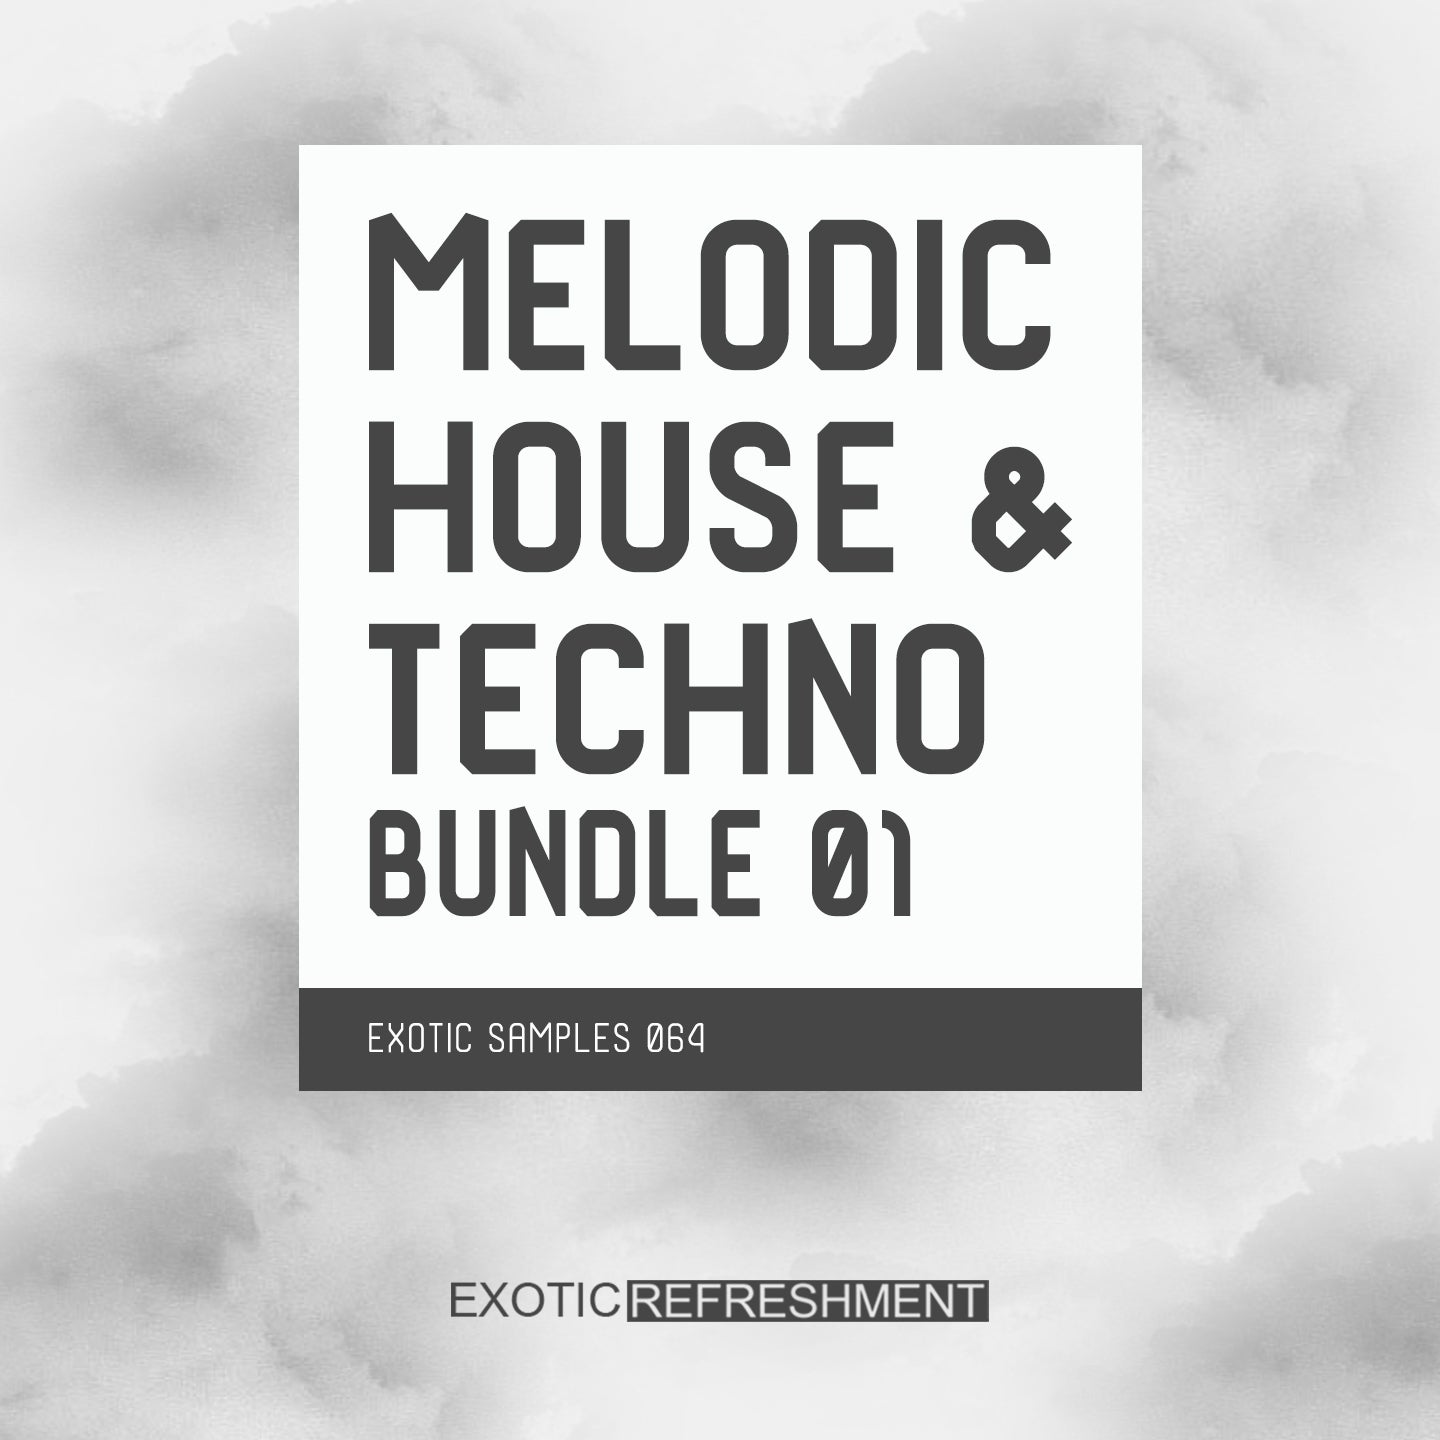 Melodic House & Techno Bundle 01 - Sample Pack